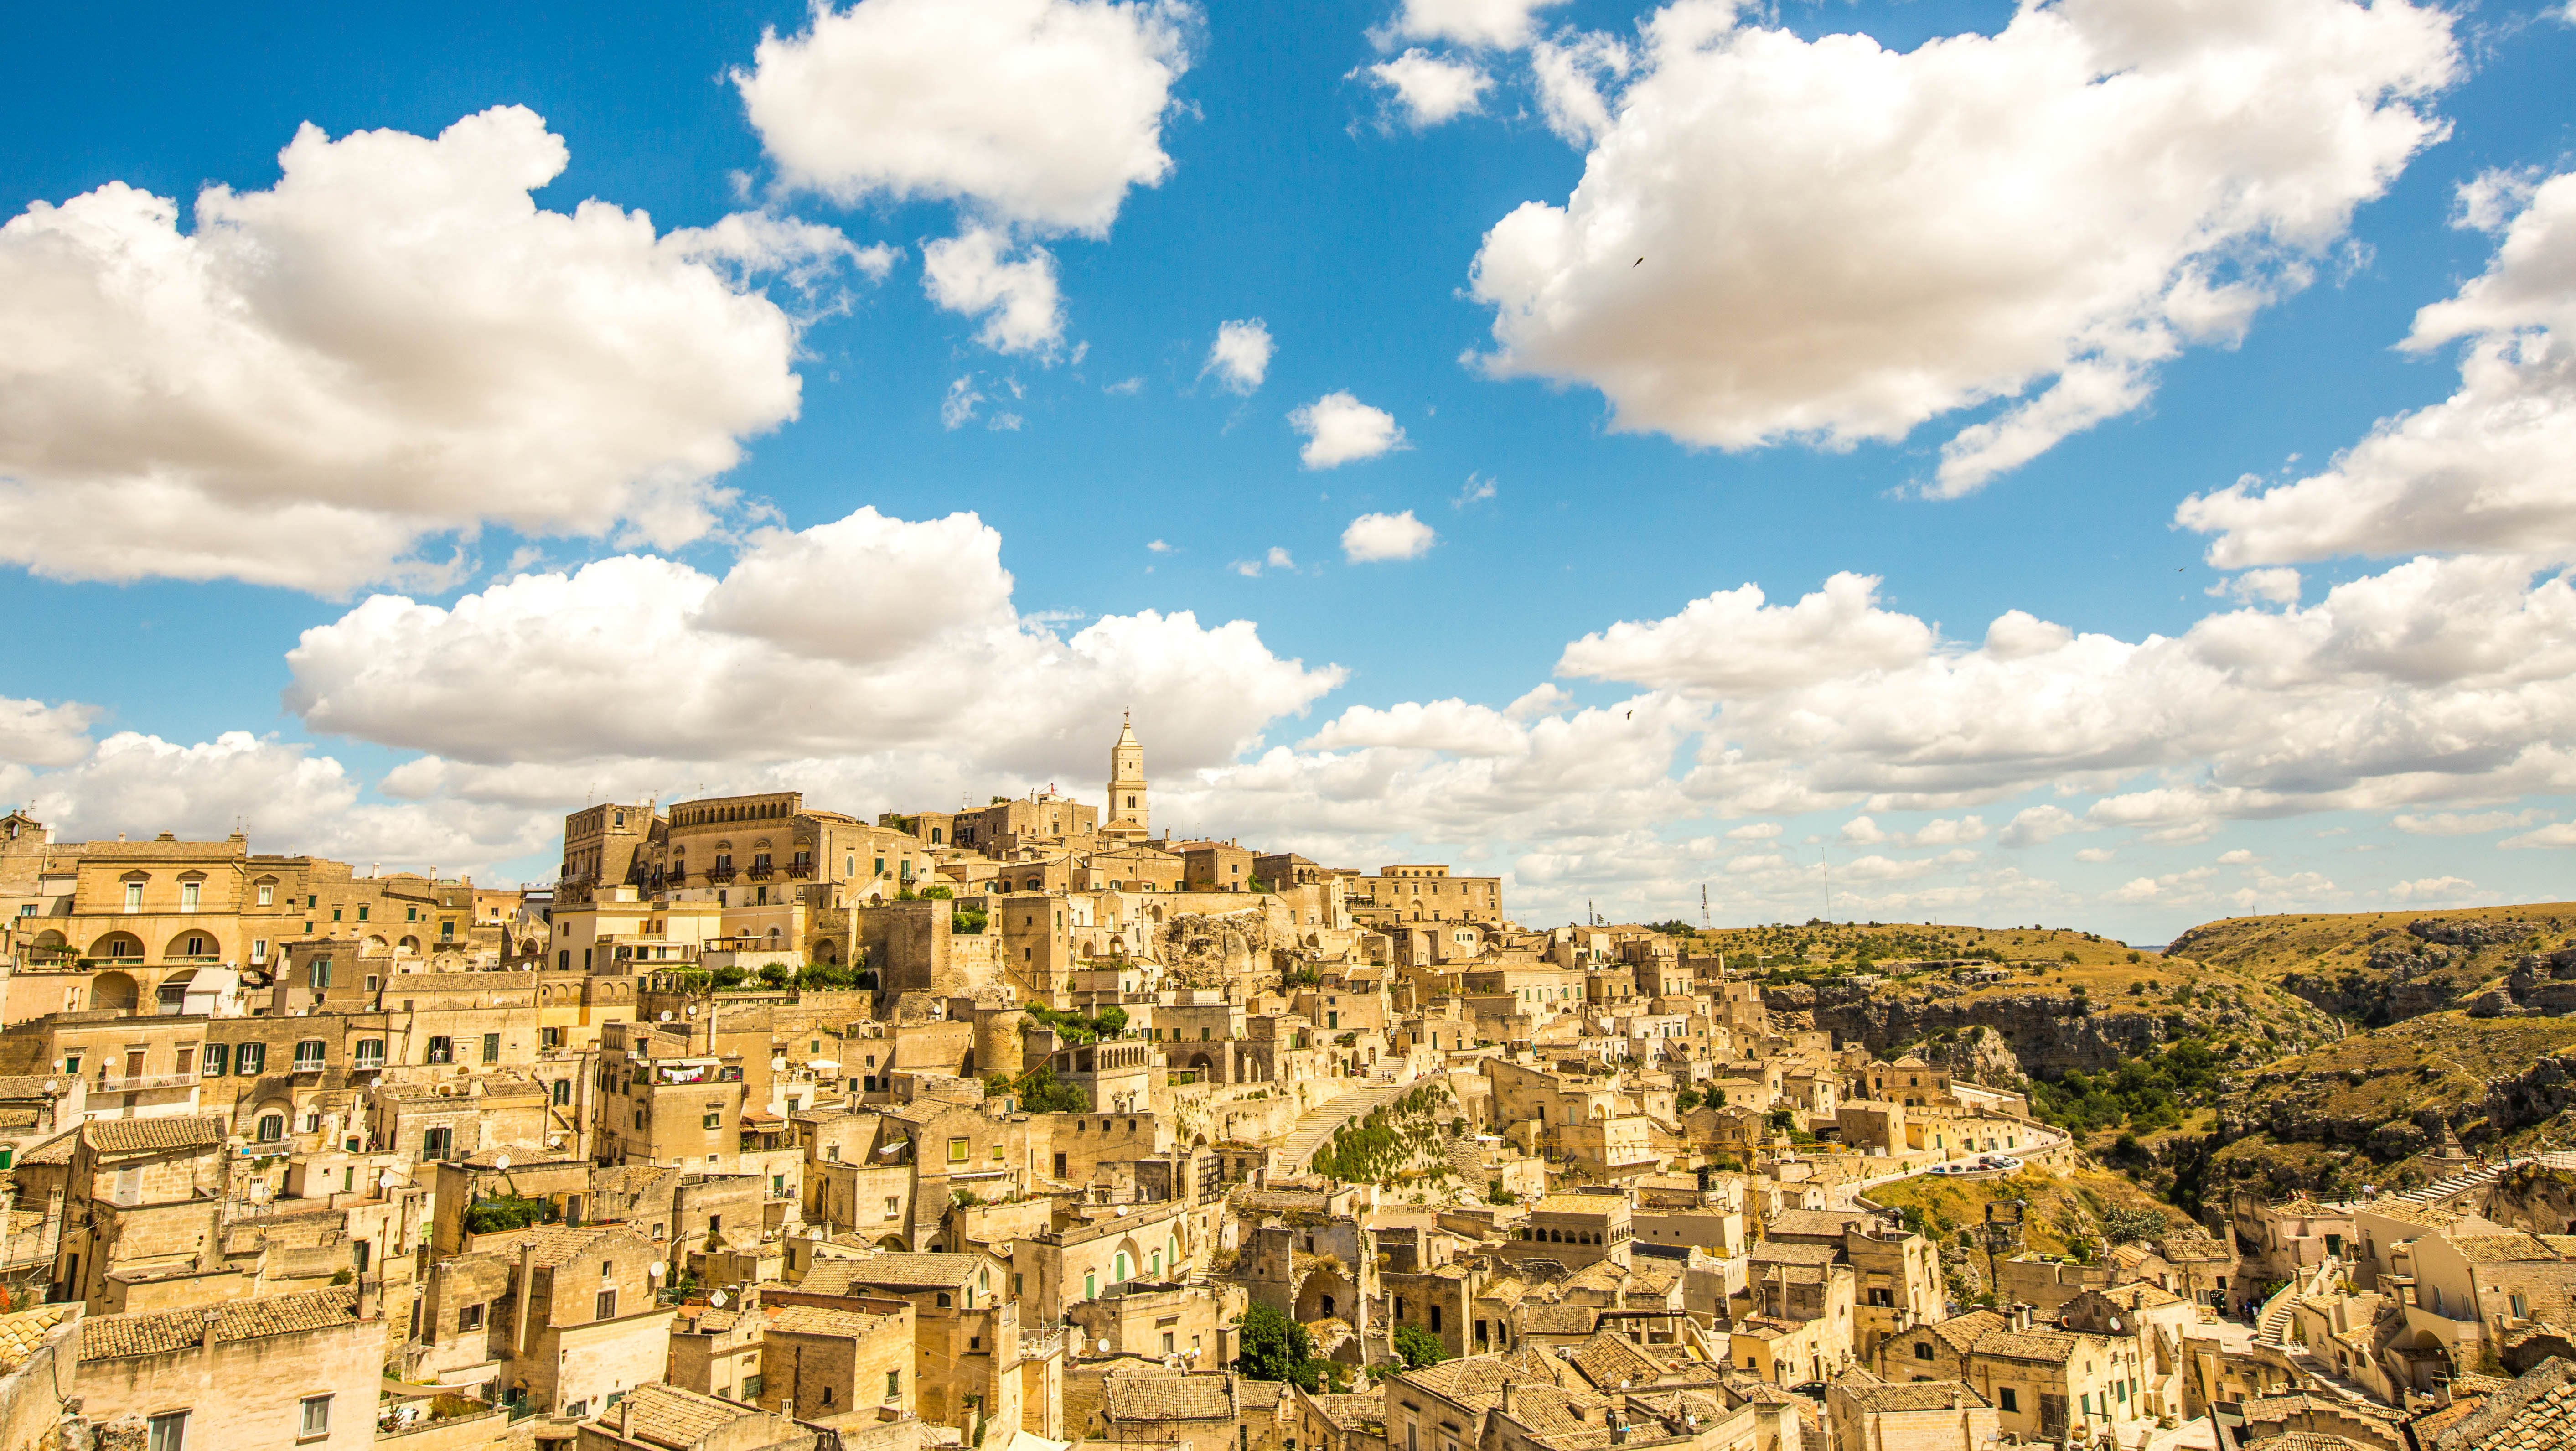 Muildier verjaardag voorwoord Matera: A guide to Italy's most magical hilltop town